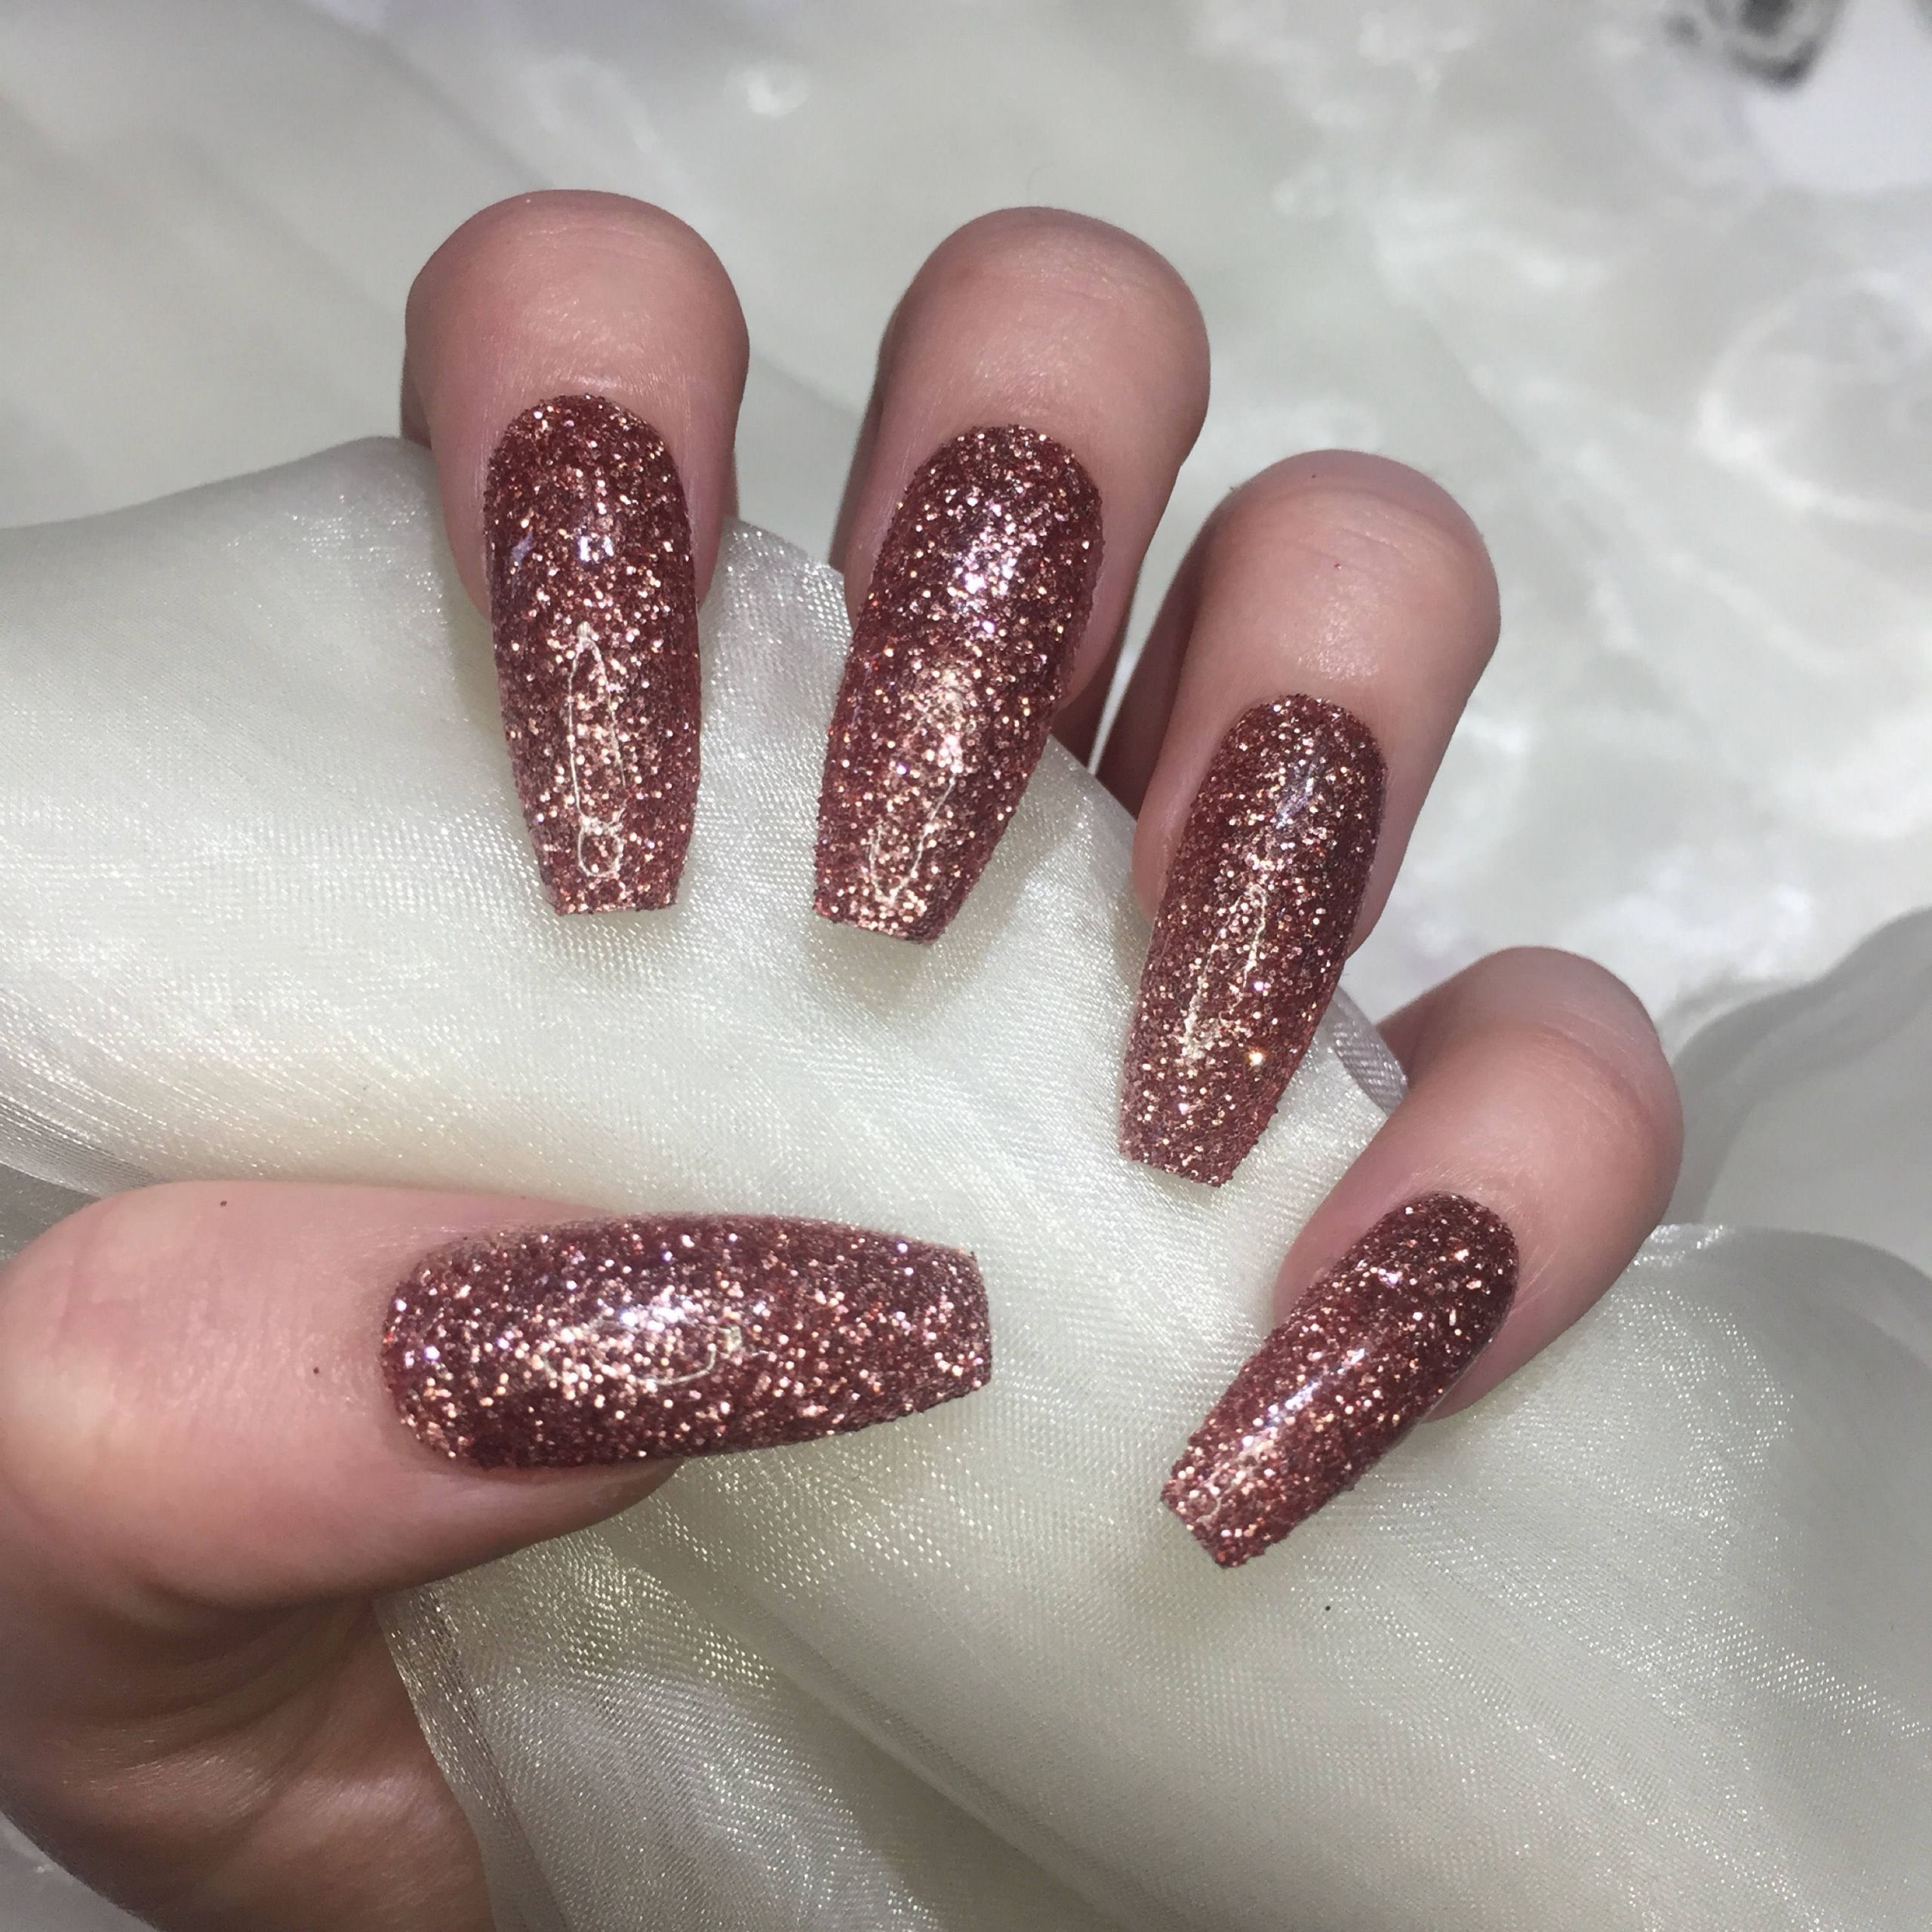 Gold Glitter Coffin Nails
 Extra Long Coffin Rose Gold Glitter Coffin False Nails